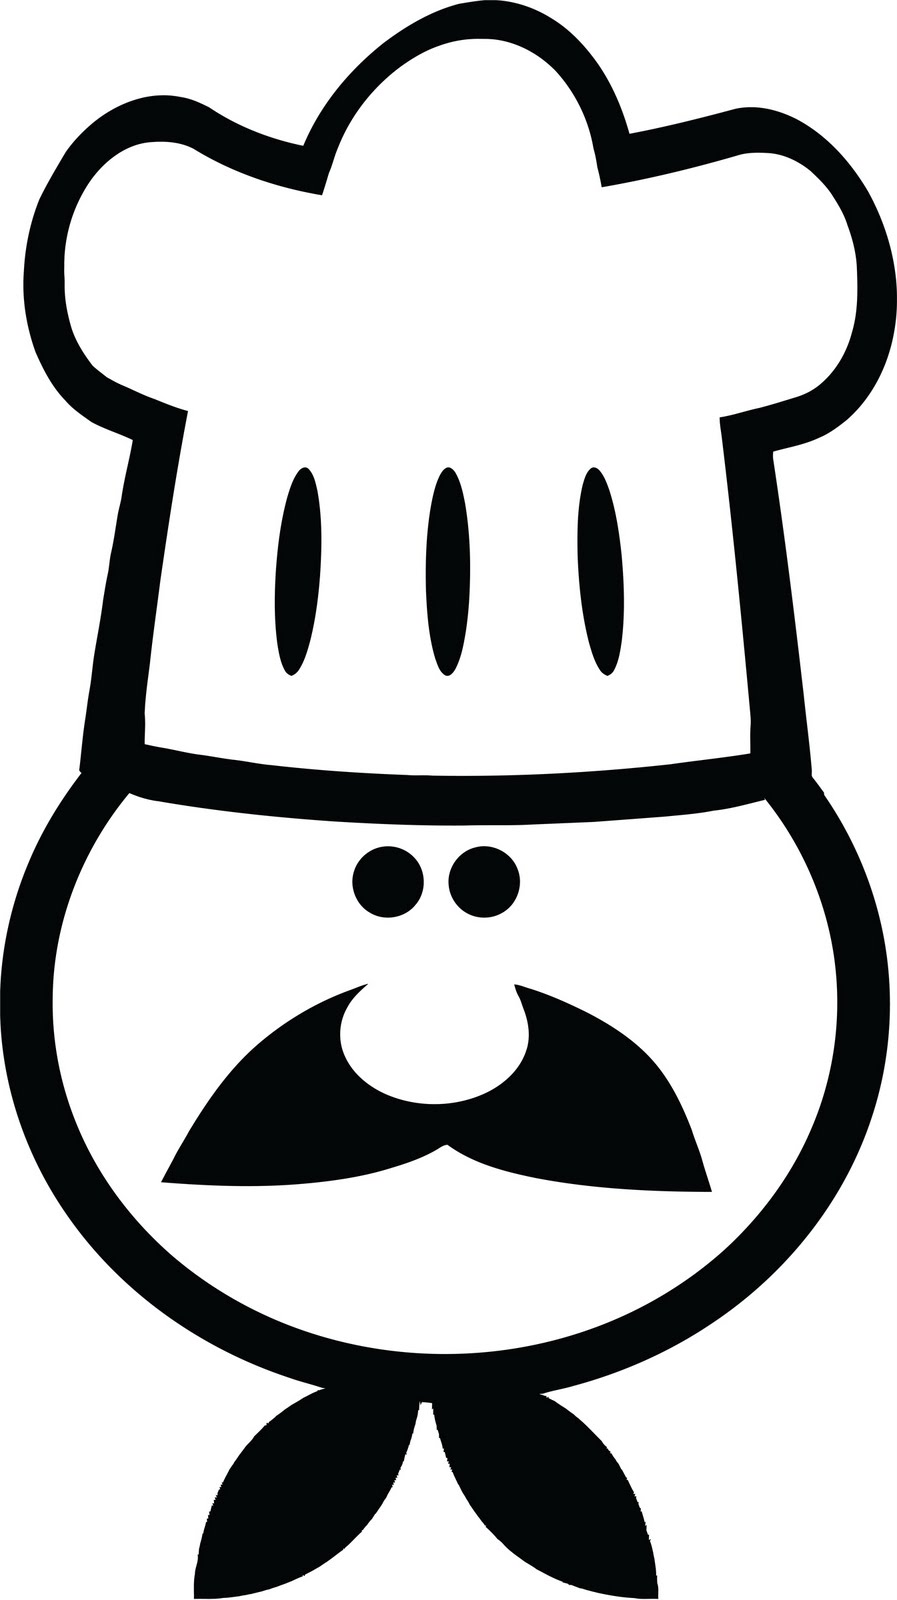 Chef Johnnys Food Facts and More: The Chef's Hat...Toque!